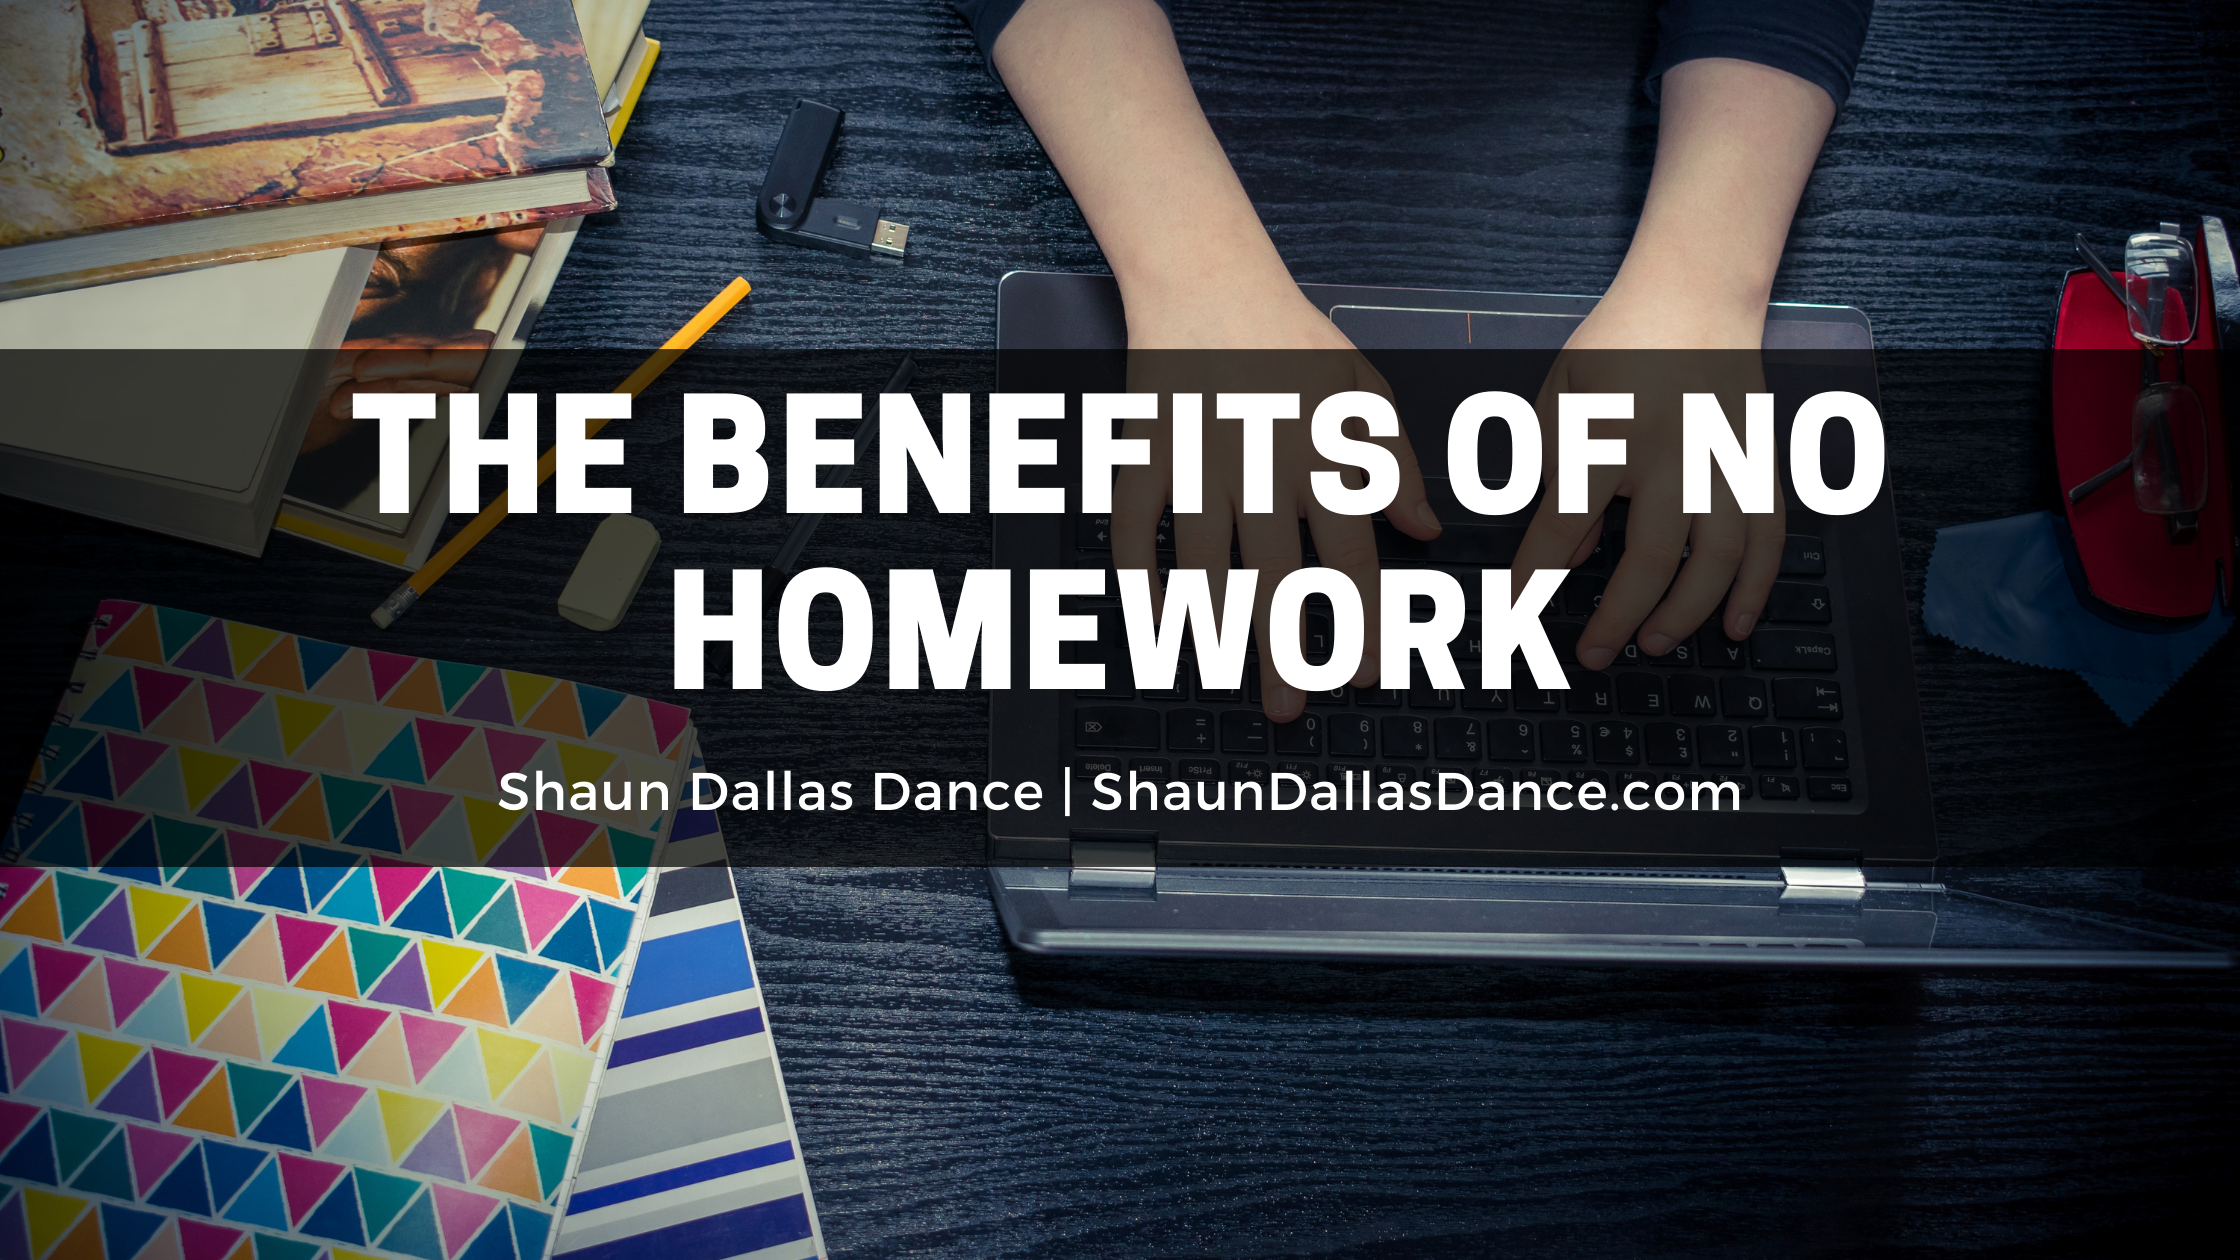 facts about having less homework